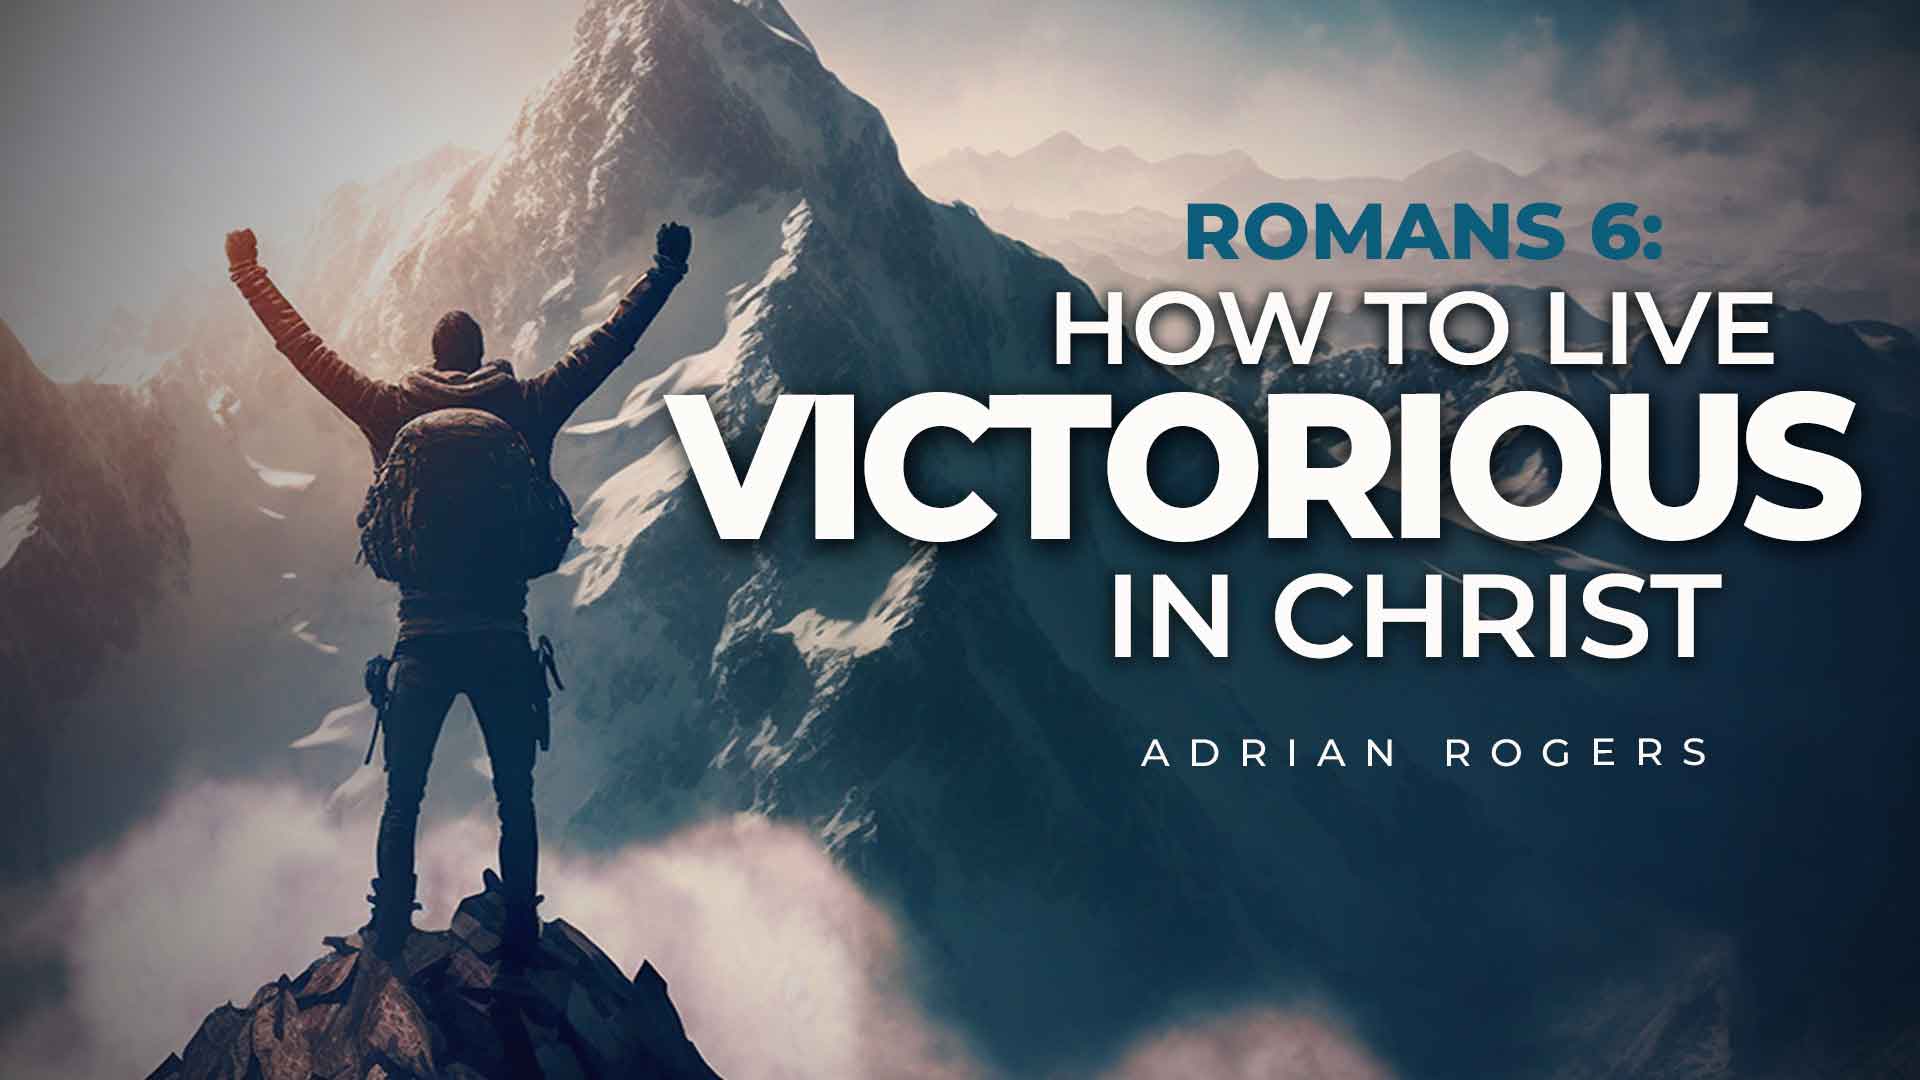 Romans 6 How to Live Victorious in Christ 1920x1080